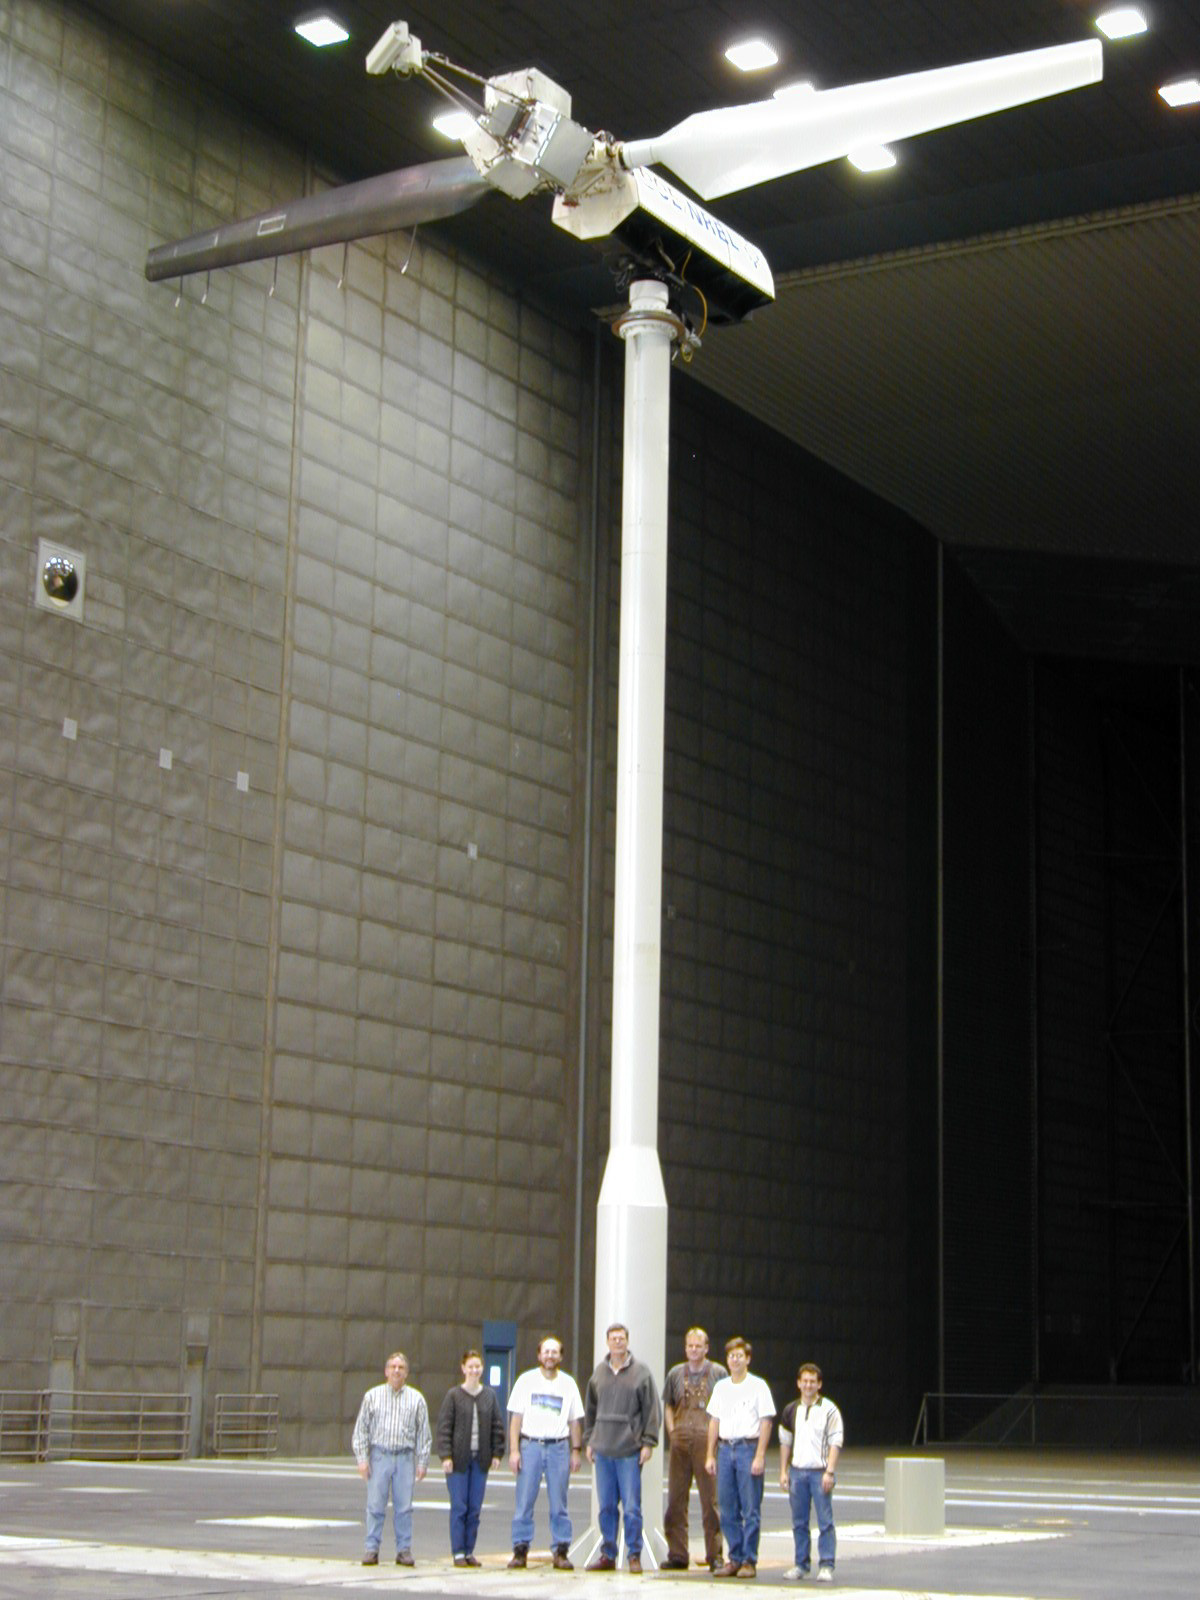 A two-bladed wind turbine inside a large garage-like space with seven people standing in the foreground.